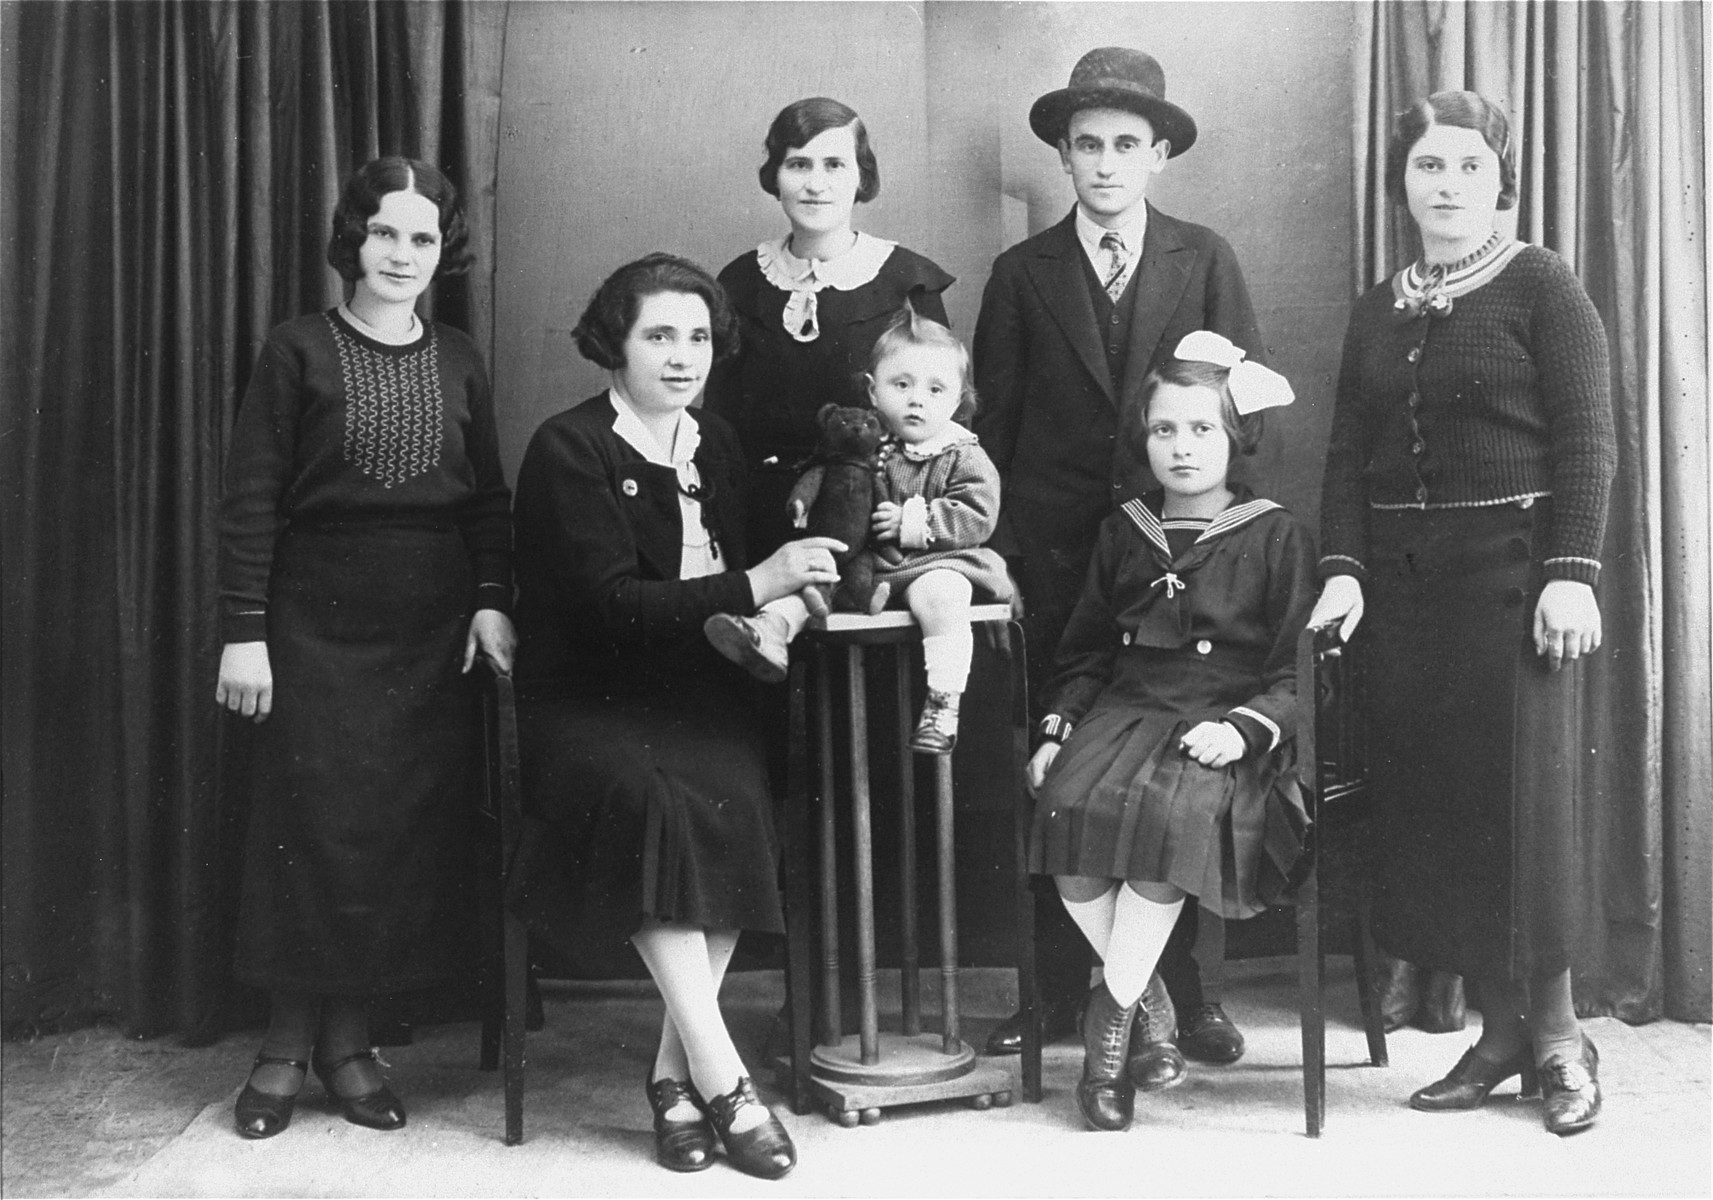 Studio portrait of the Englander family, taken on the eve of Lillian's emigration to the U.S.  

Pictured (from left to right) are: Rozi, Ettela (Adolph's wife), Anush (standing), Ali, (Adolph's youngest son); Magda (Adolph's daughter), Shlomi (standing) and Lillian Englander.  

Shlomi Englander died soon after this portrait was taken.  Rozi went into hiding with her niece, Magda.  She was caught in 1942 and deported to Poland.  Anush was killed in 1942, along with her husband and child.  Adolph and Ettela Englander, together with their two children, Ali and Magda, were deported to Auschwitz in 1944.  Only Magda survived.